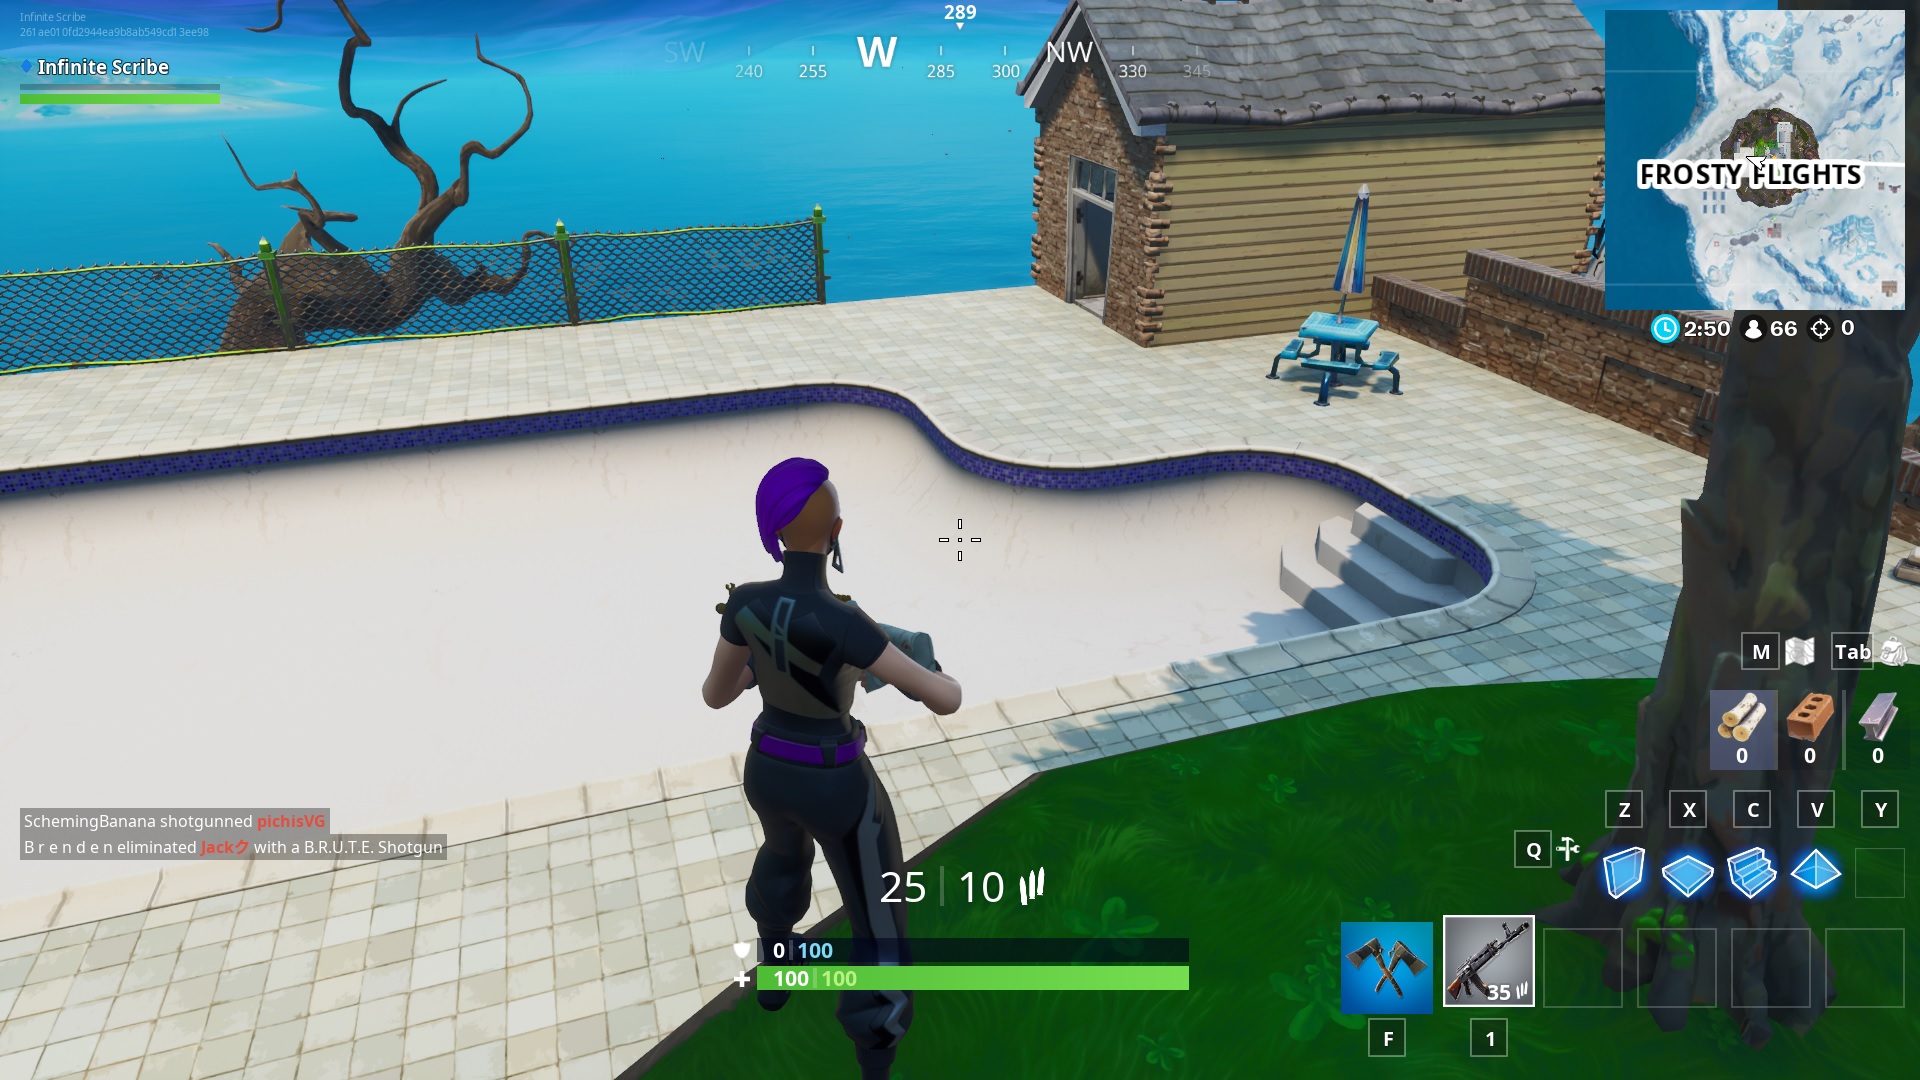 Where to find Fortnites bat statue aboveground pool and seat for giants